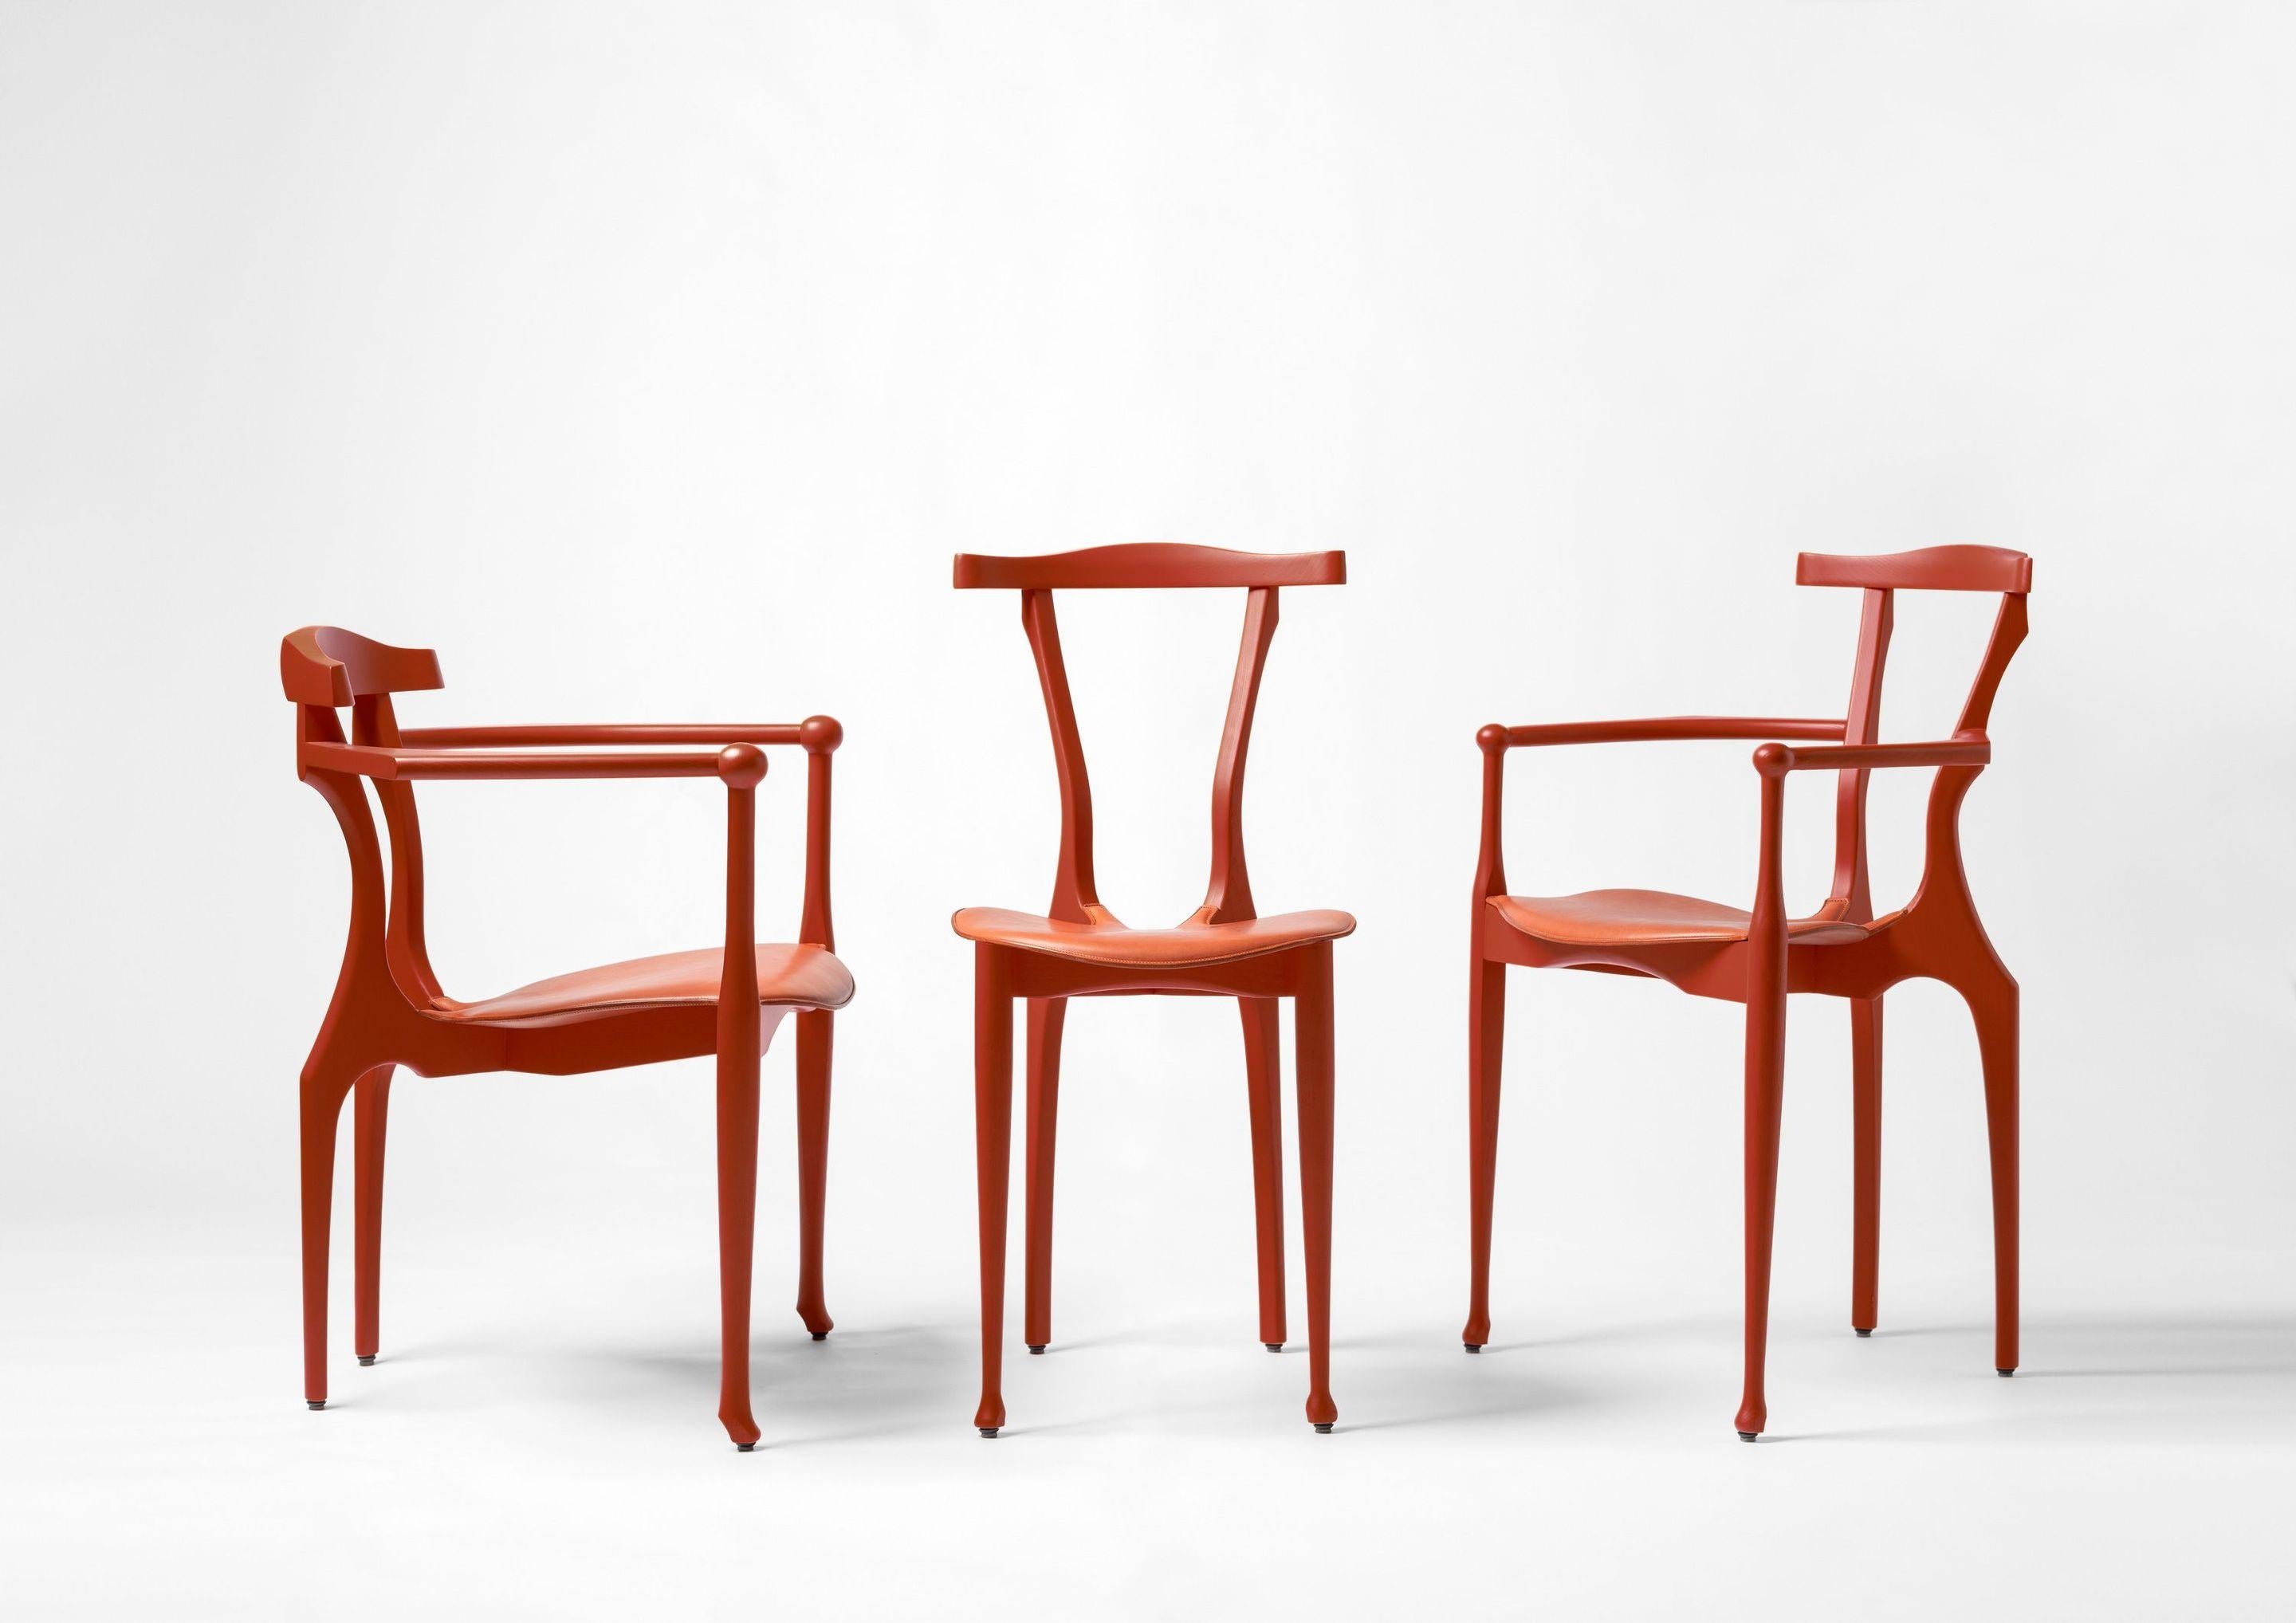 The Gaulinetta is an evolution of the Gaulino chair. In words of Oscar Tusquets «In homage to Enzo Mari, who called his chair Tonietta, a derivative of Thonet, I’ve called this chair Gaulinetta, after the Gaulino. 

This is an ideal chair for dining